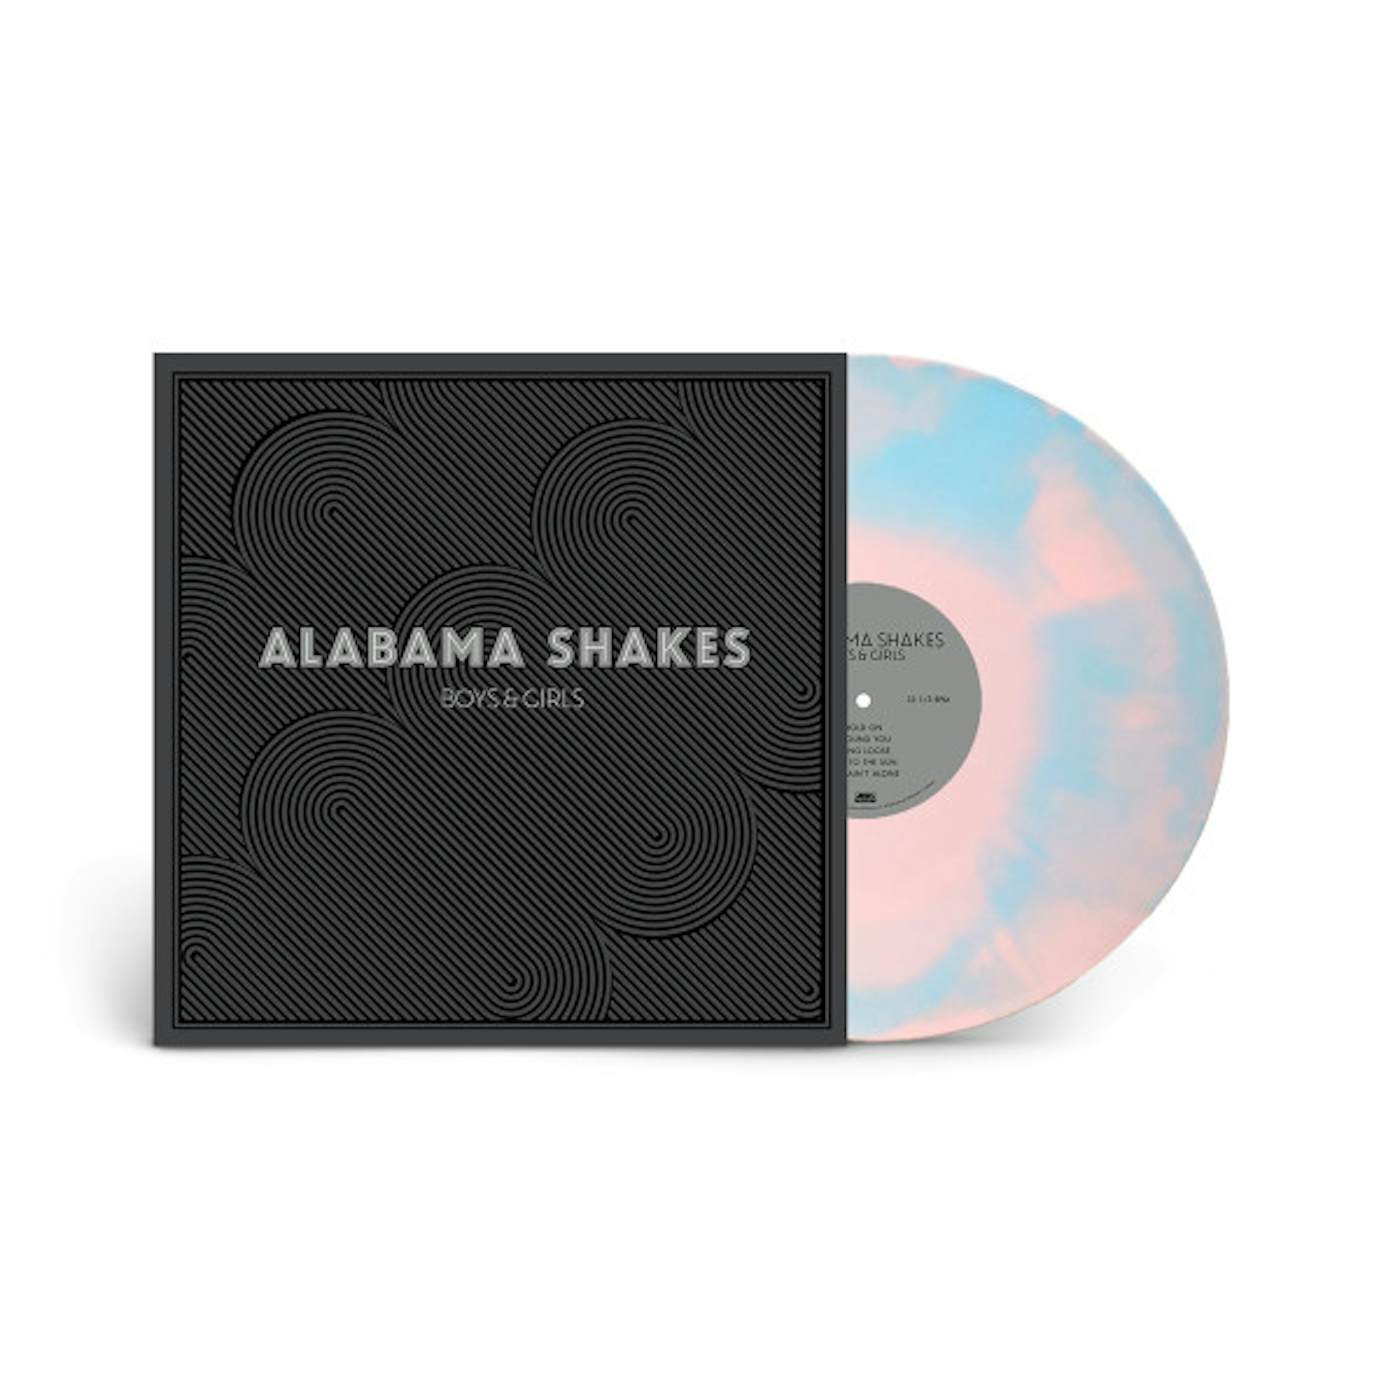 Alabama Shakes BOYS & GIRLS - Limited Edition Reverse Color Vinyl Record